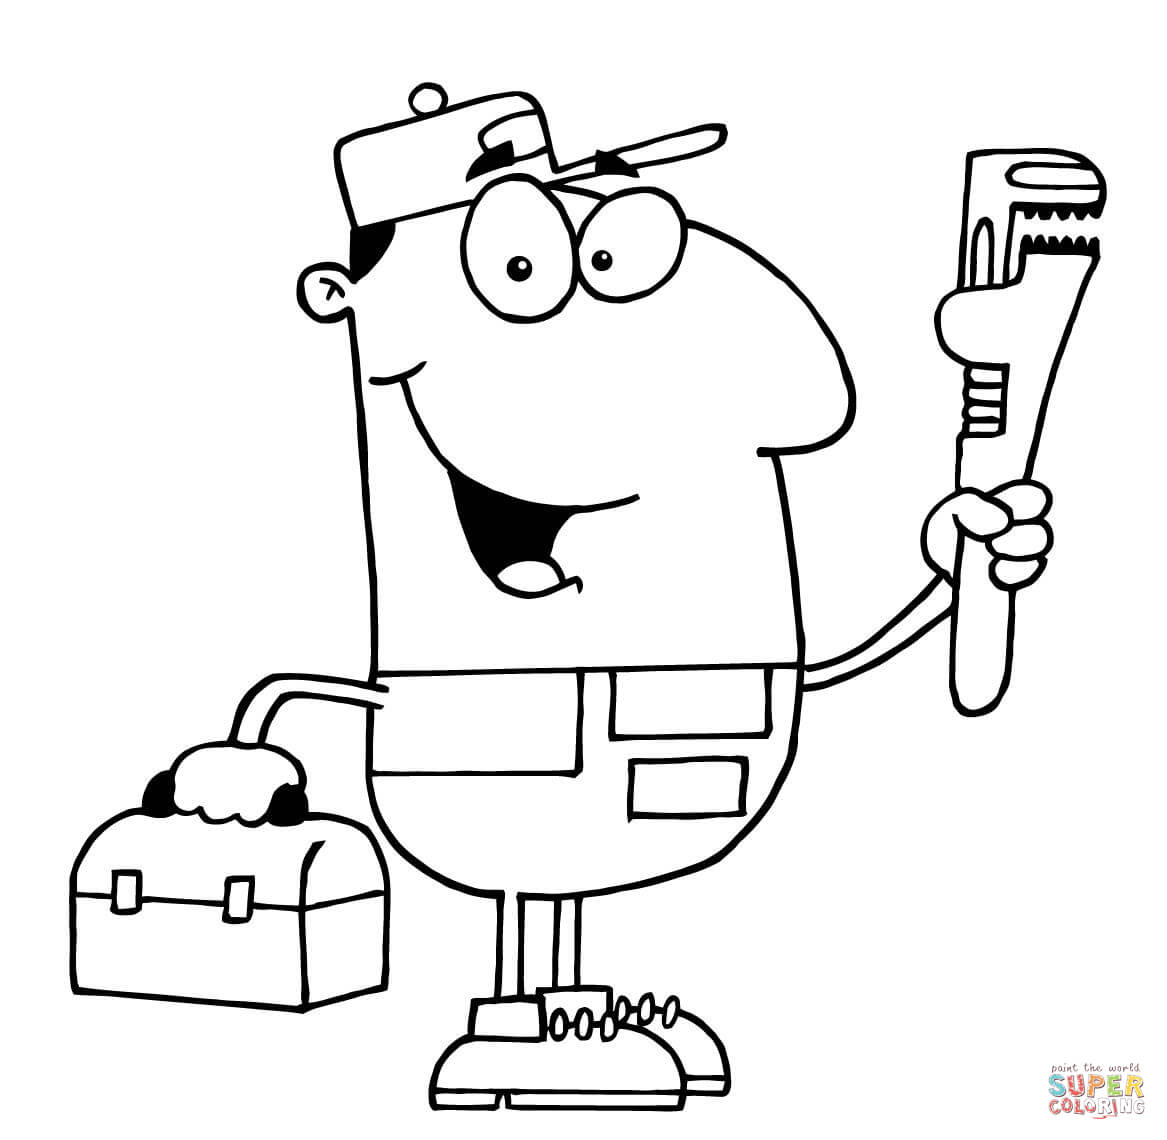 The Plumber Guy coloring page | Free Printable Coloring Pages